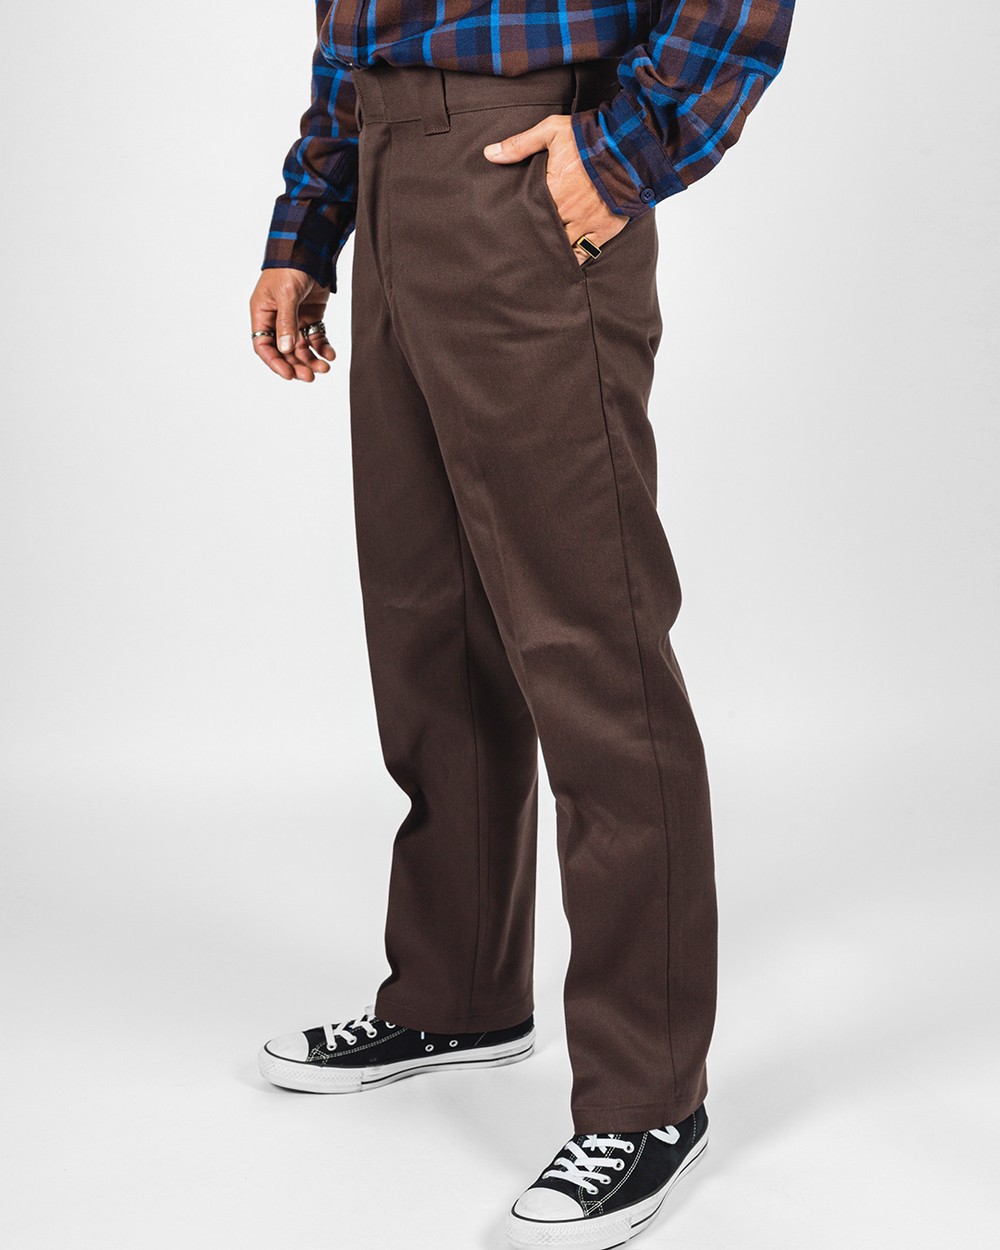 Womens Relaxed Fit Carpenter Pants  Dickies US